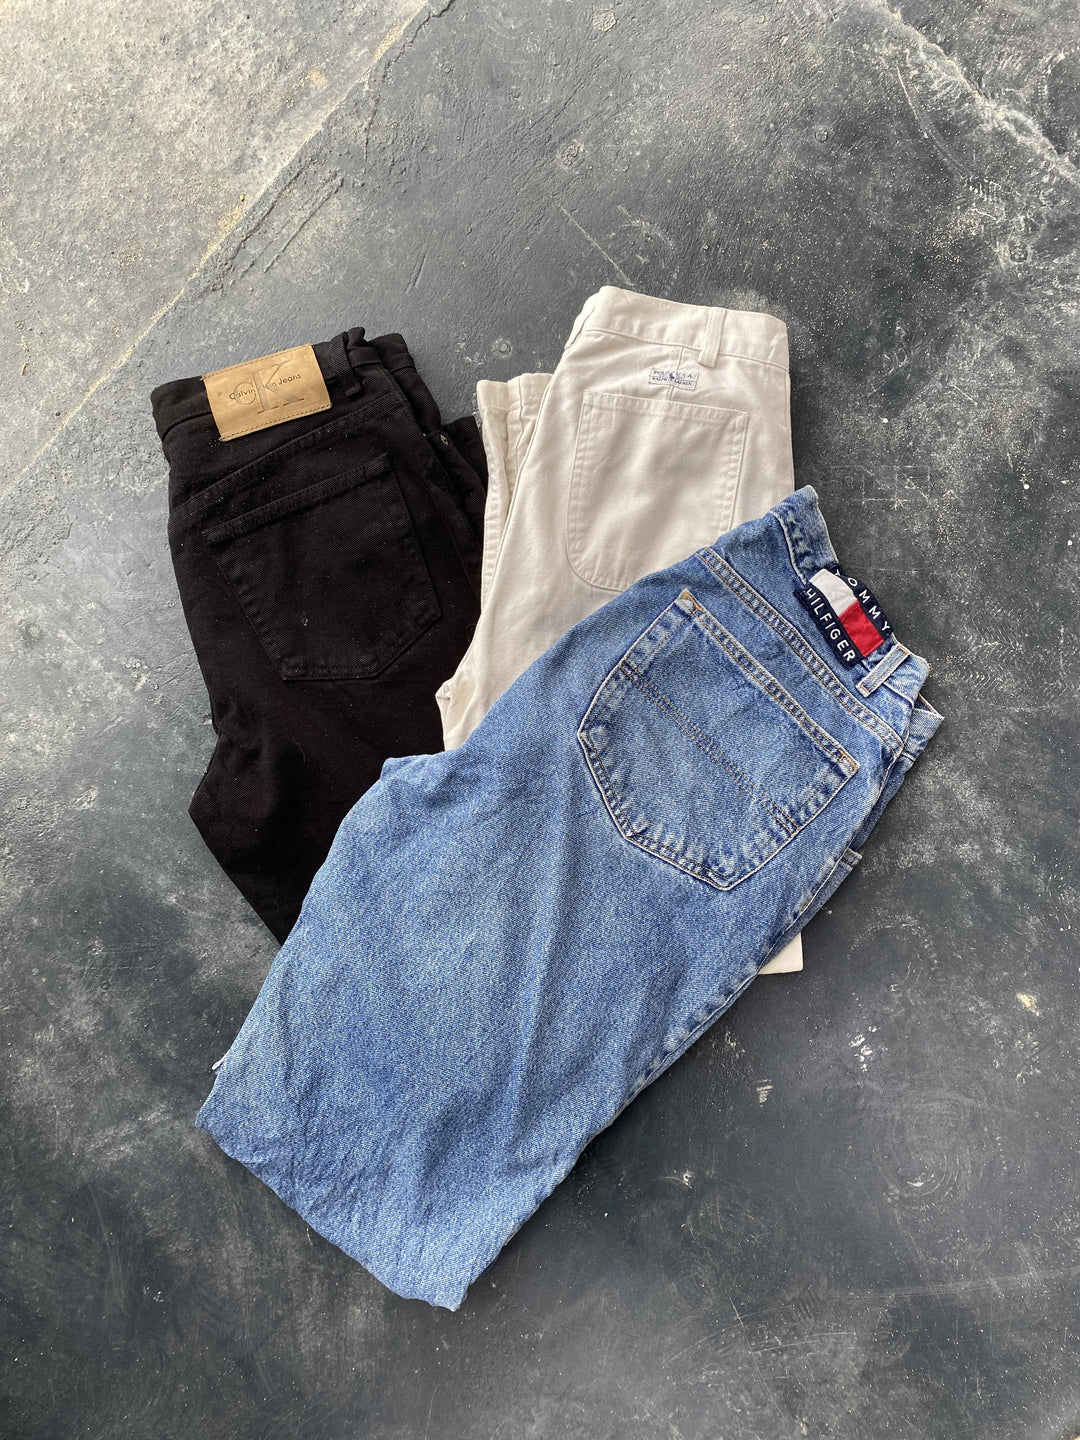 10 x Branded Jeans (Larger Sizes)